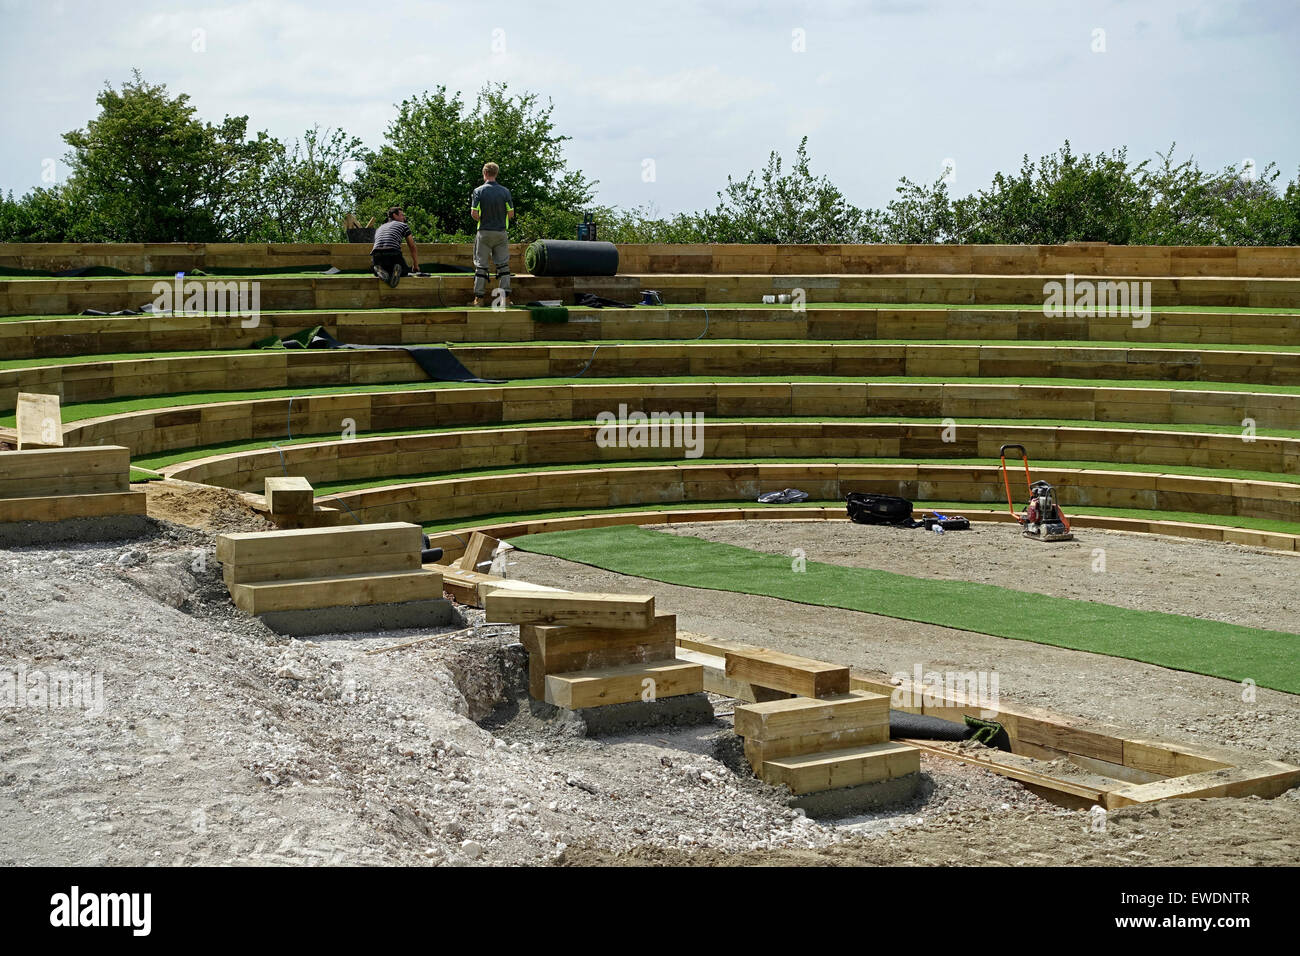 Construction work on the Brighton Open Air Theatre, (BOAT or B.O.A.T), Dyke Road Park, Brighton, England, 2015 Stock Photo